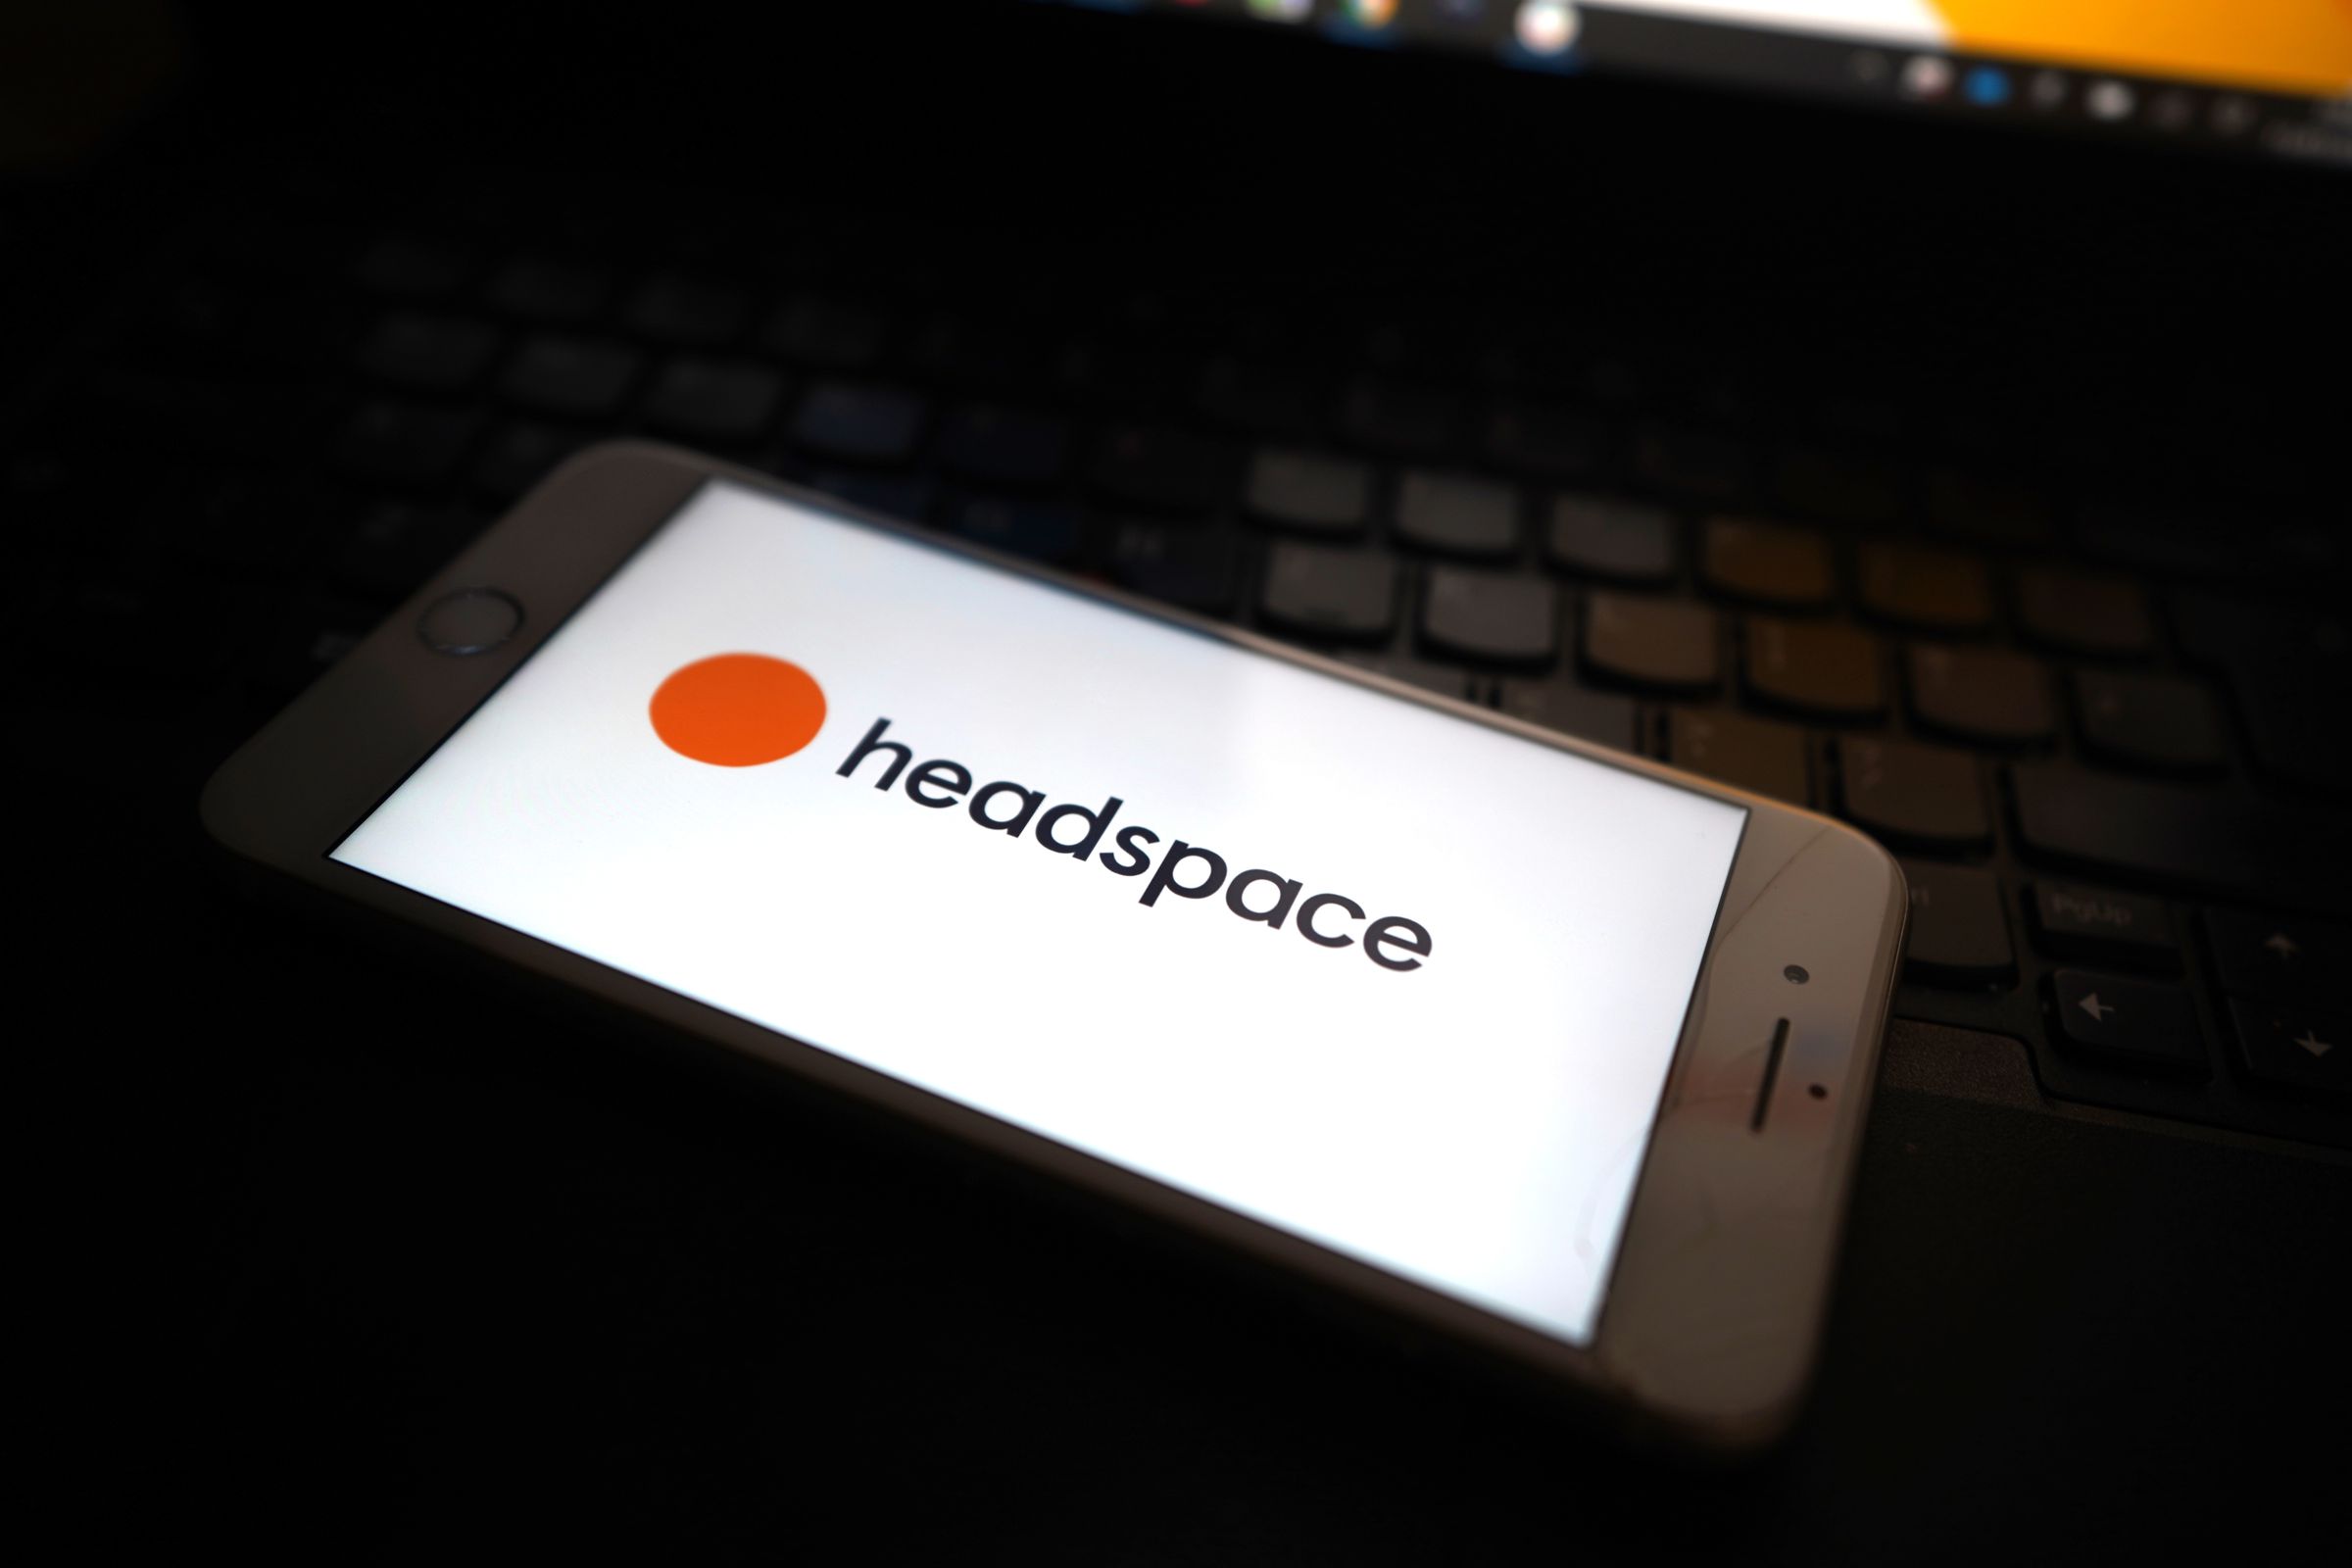 The Headspace logo seen on an iPhone screen.